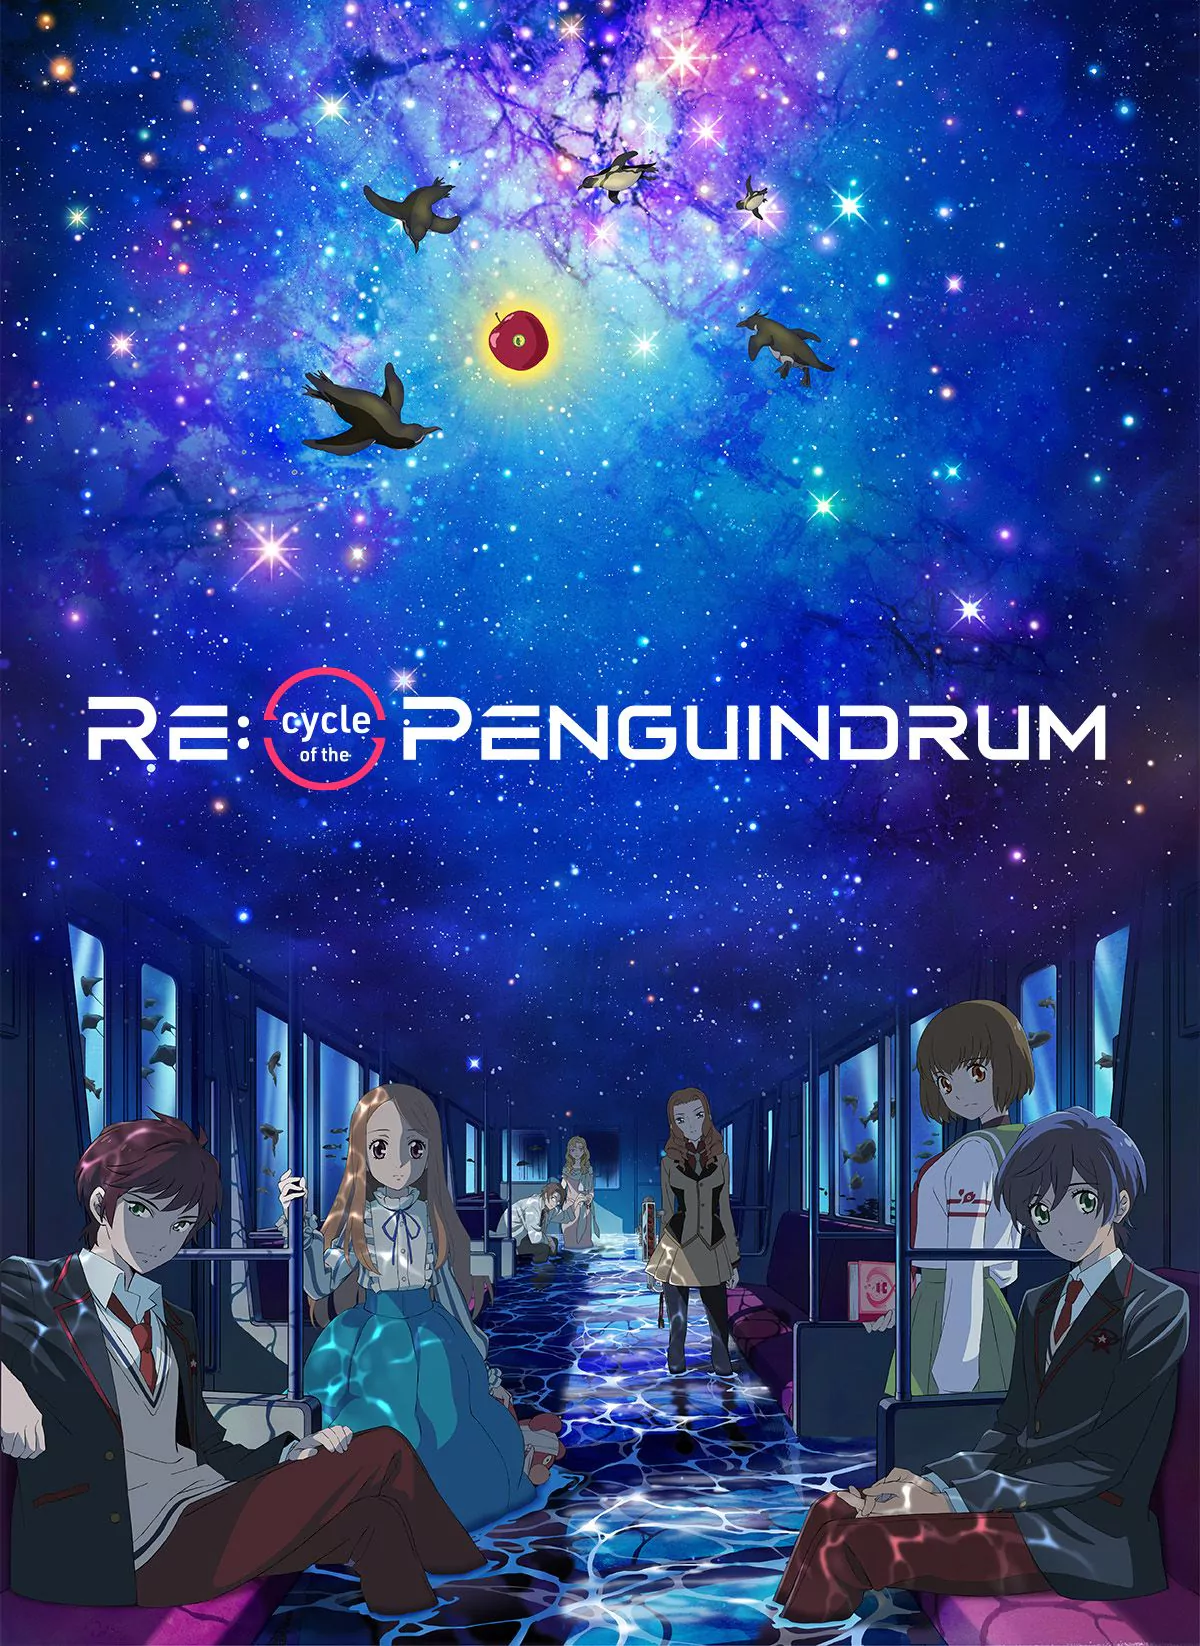 Re:cycle of the Penguindrum